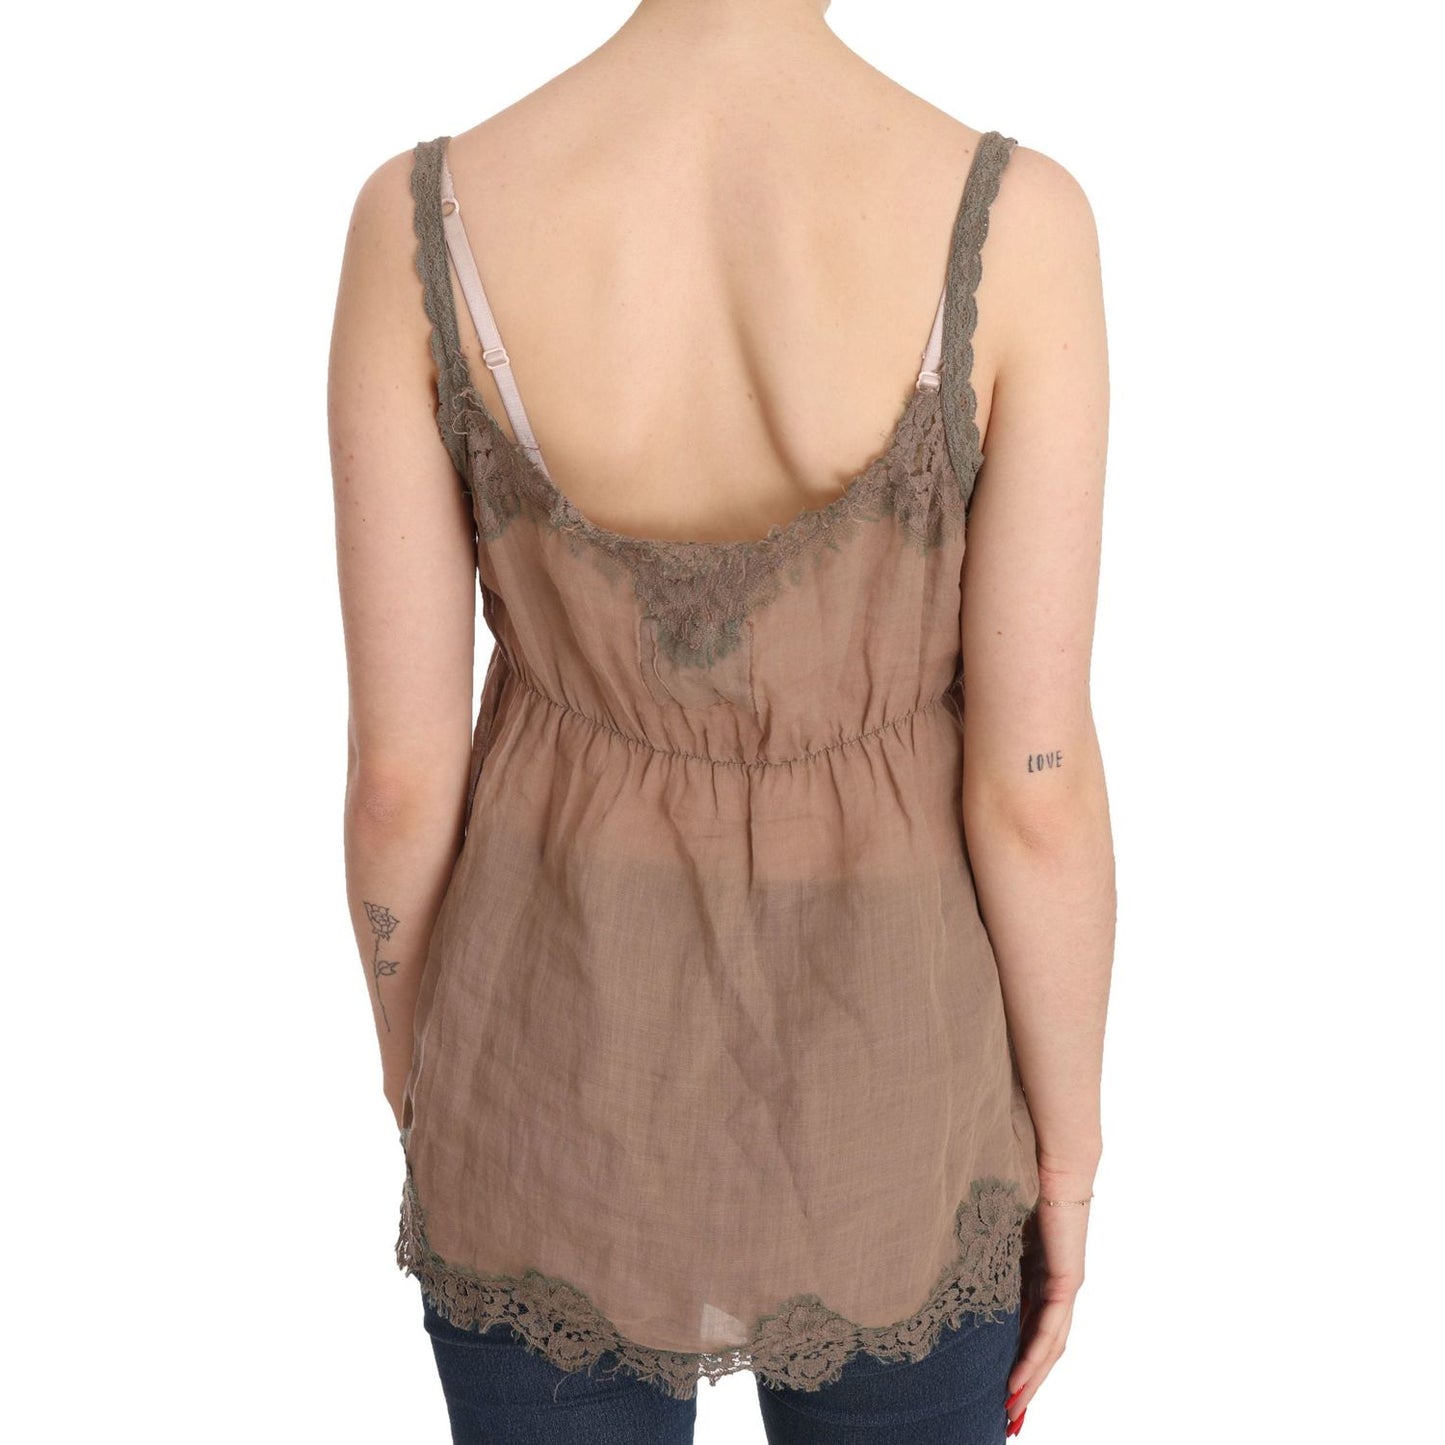 PINK MEMORIES Elegant Lace Brown Linen Blouse brown-lace-spaghetti-strap-plunging-top-blouse